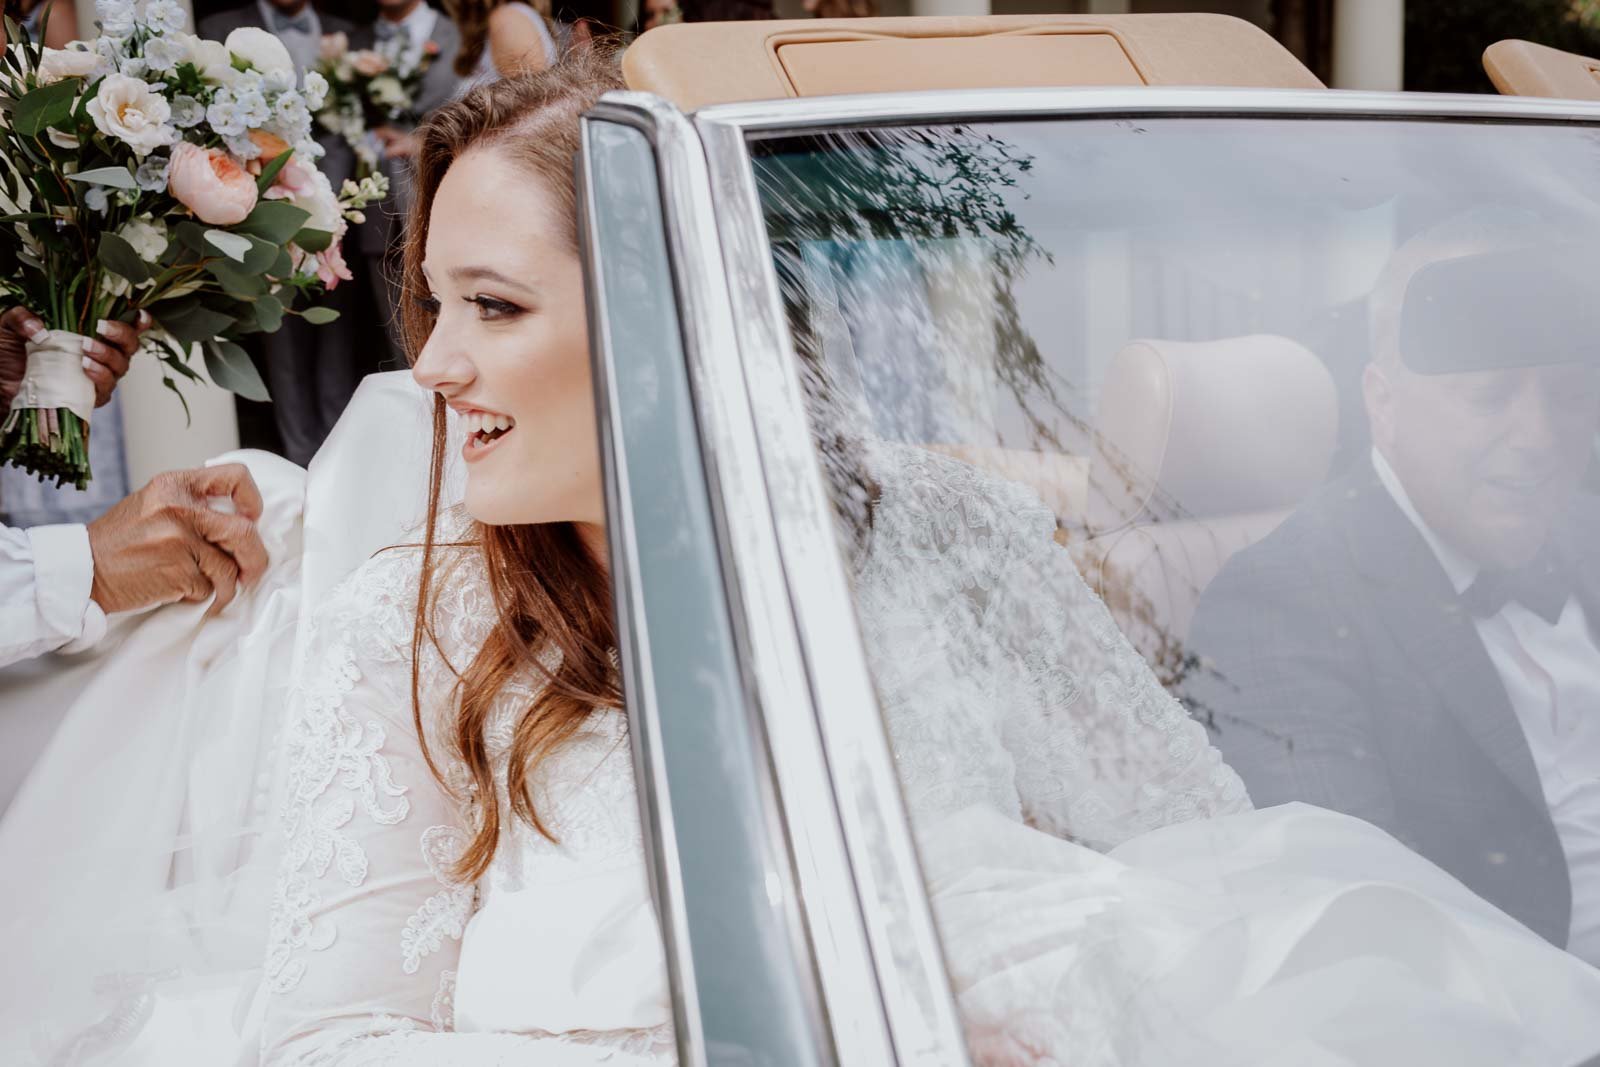 The bride enters a beautiful antique car to drive her to the ceremony spot by her uncle